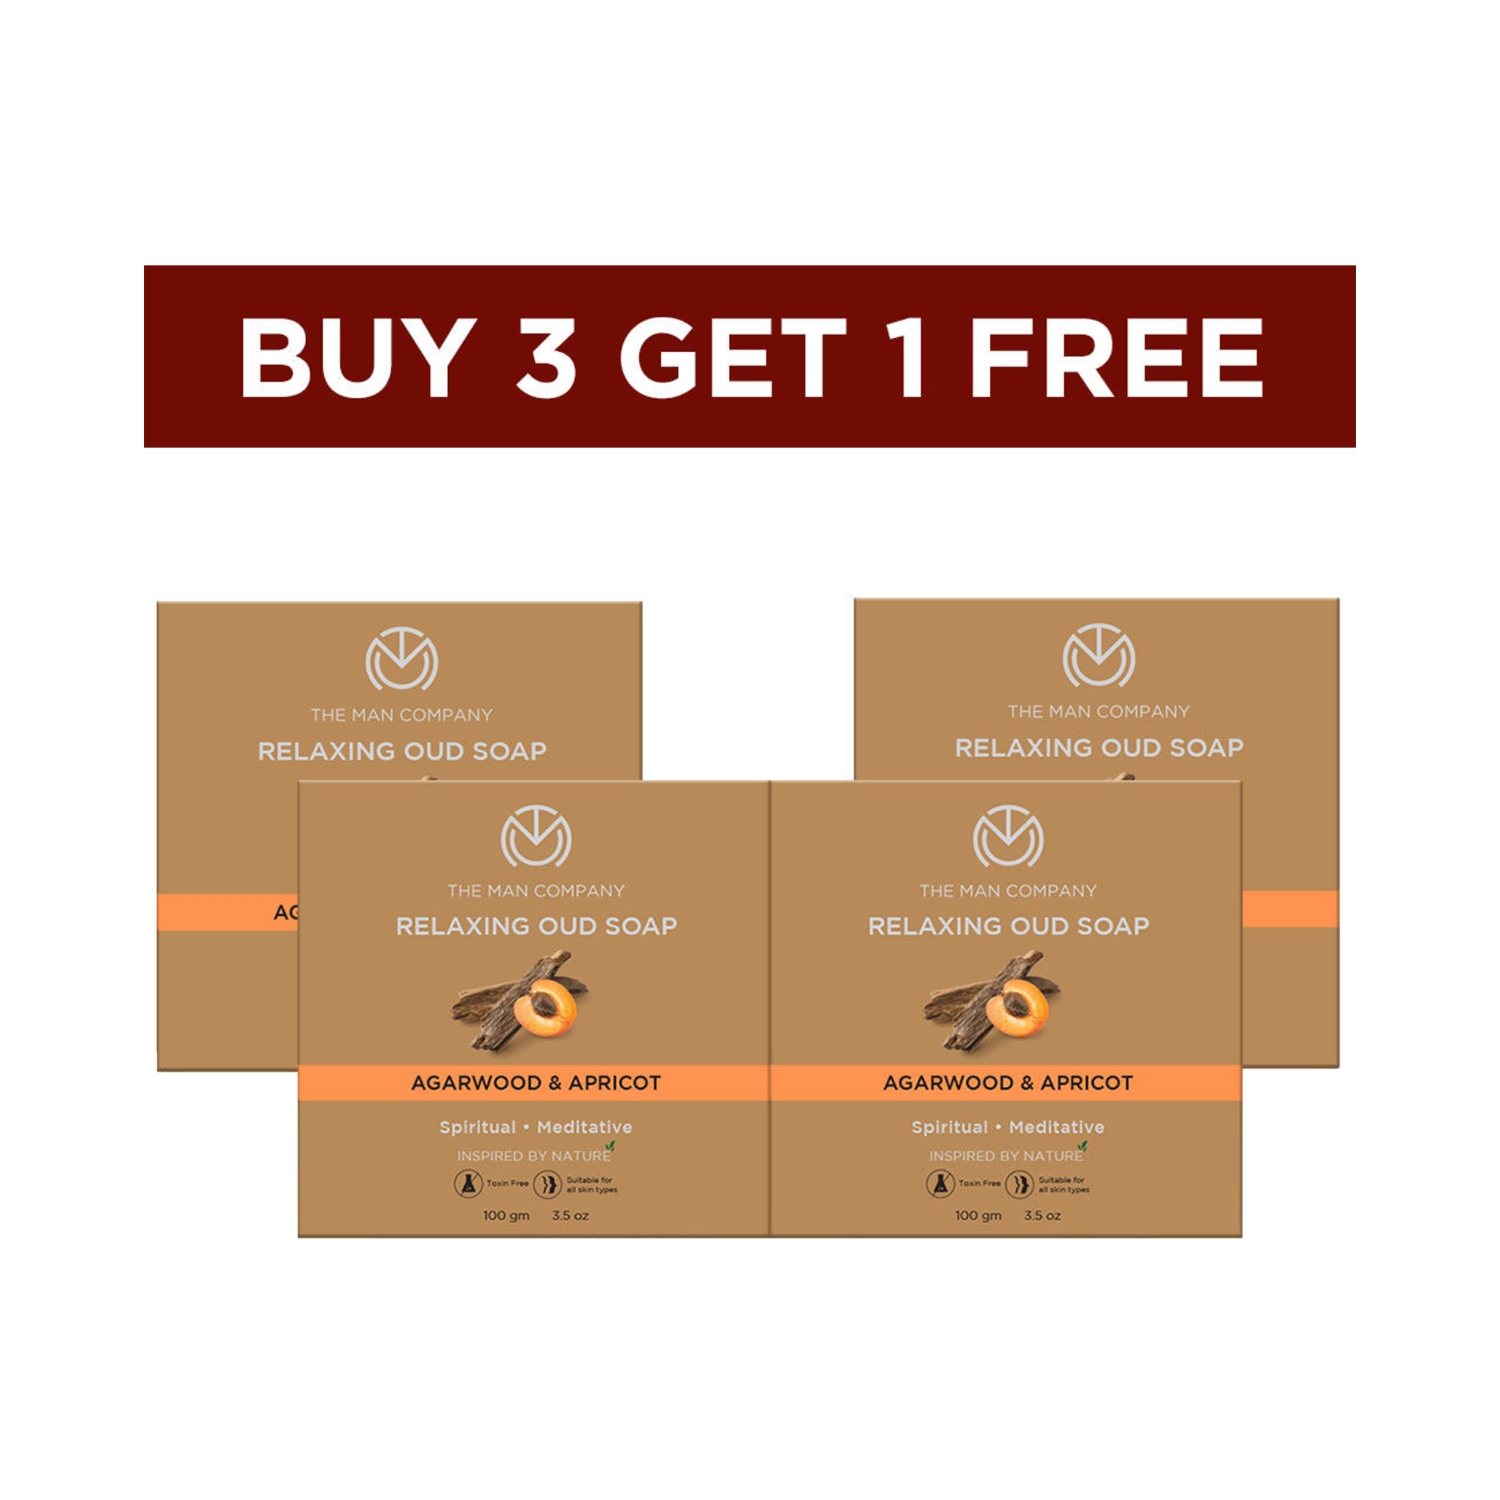 The Man Company | The Man Company Agarwood & Apricot Relaxing Oud Soap Buy 3 Get 1 Free (4Pcs)